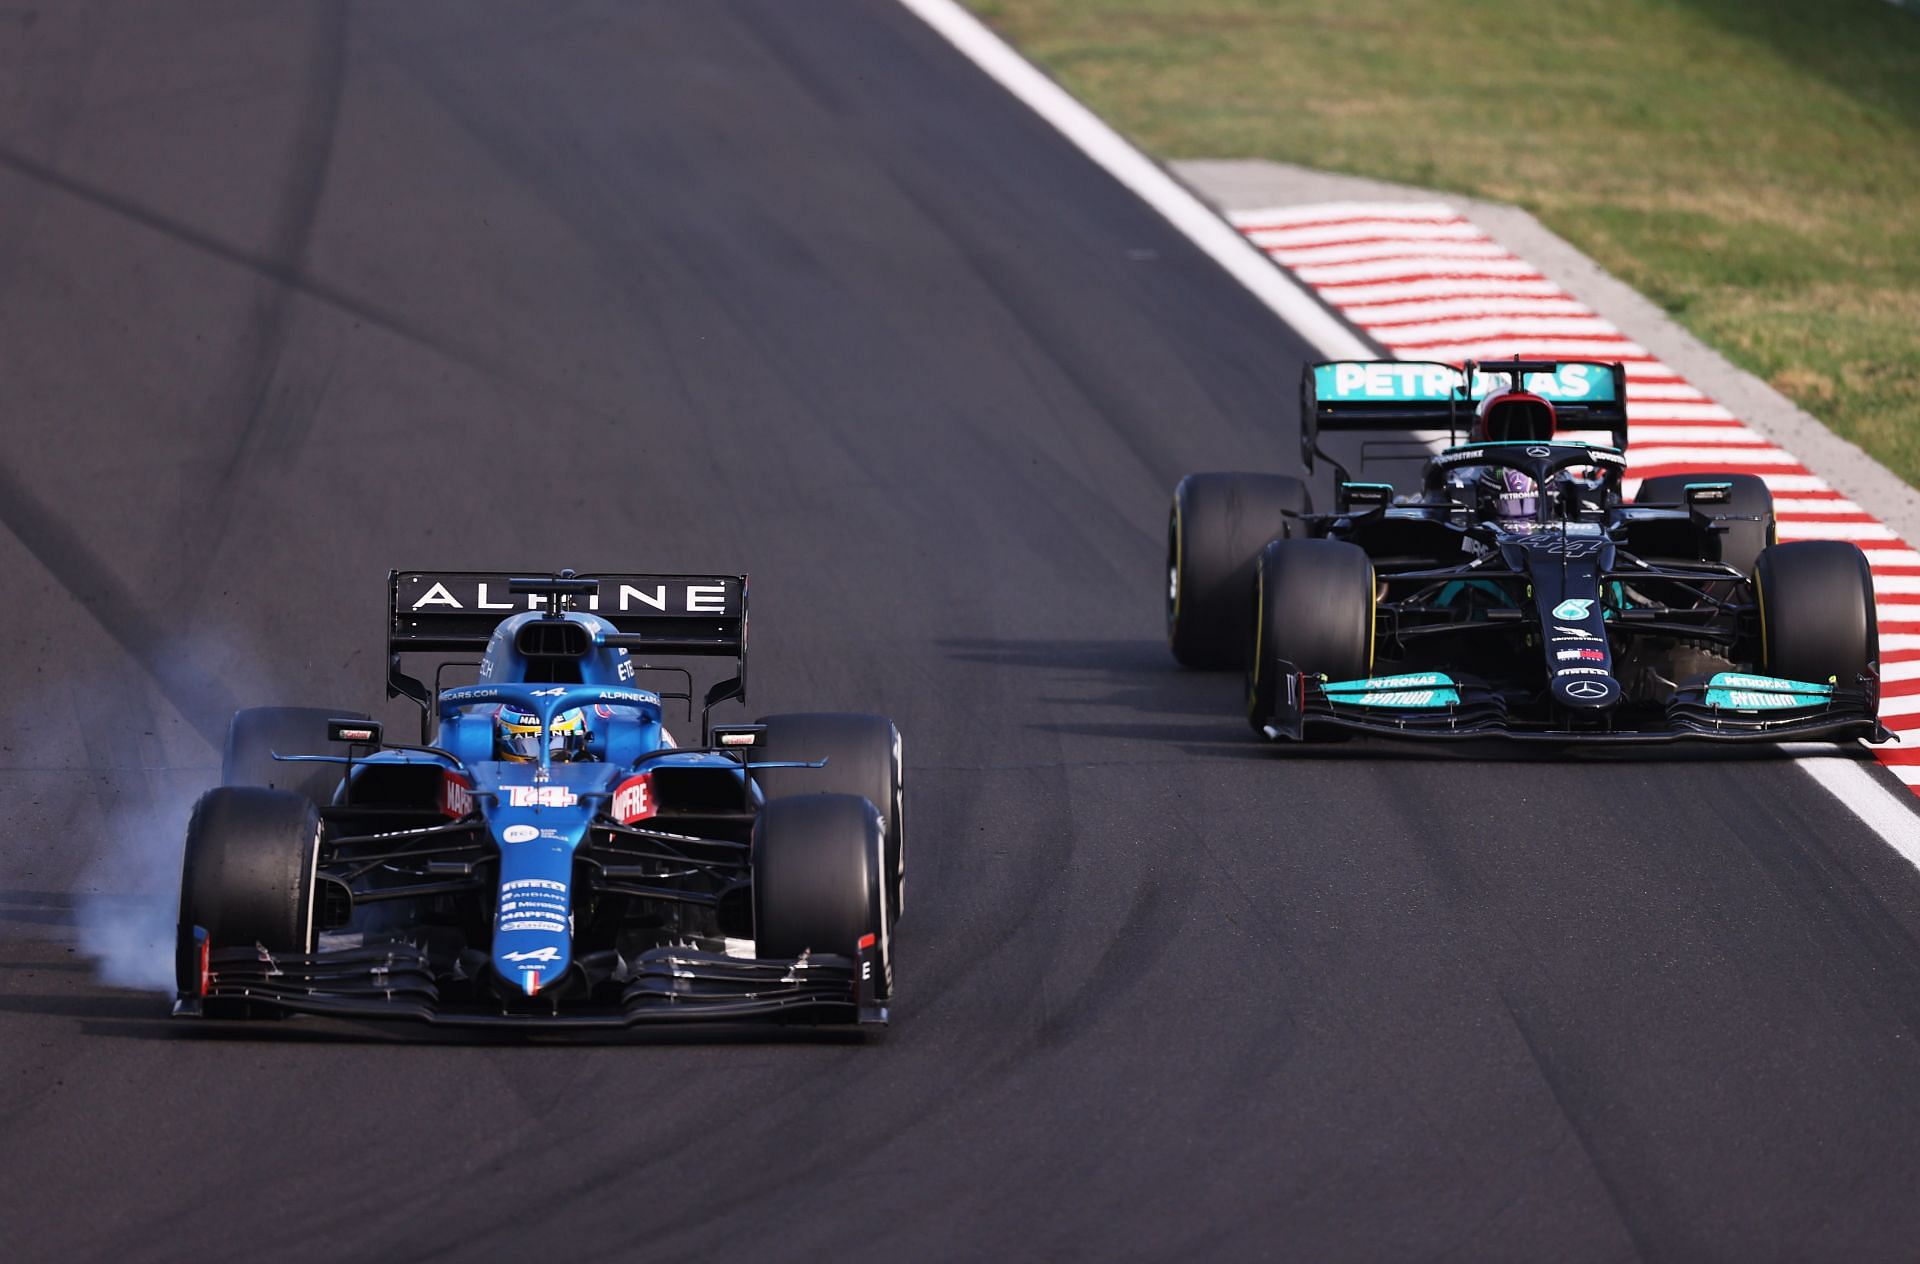 Fernando Alonso leads Lewis Hamilton on track. (Photo by Lars Baron/Getty Images)